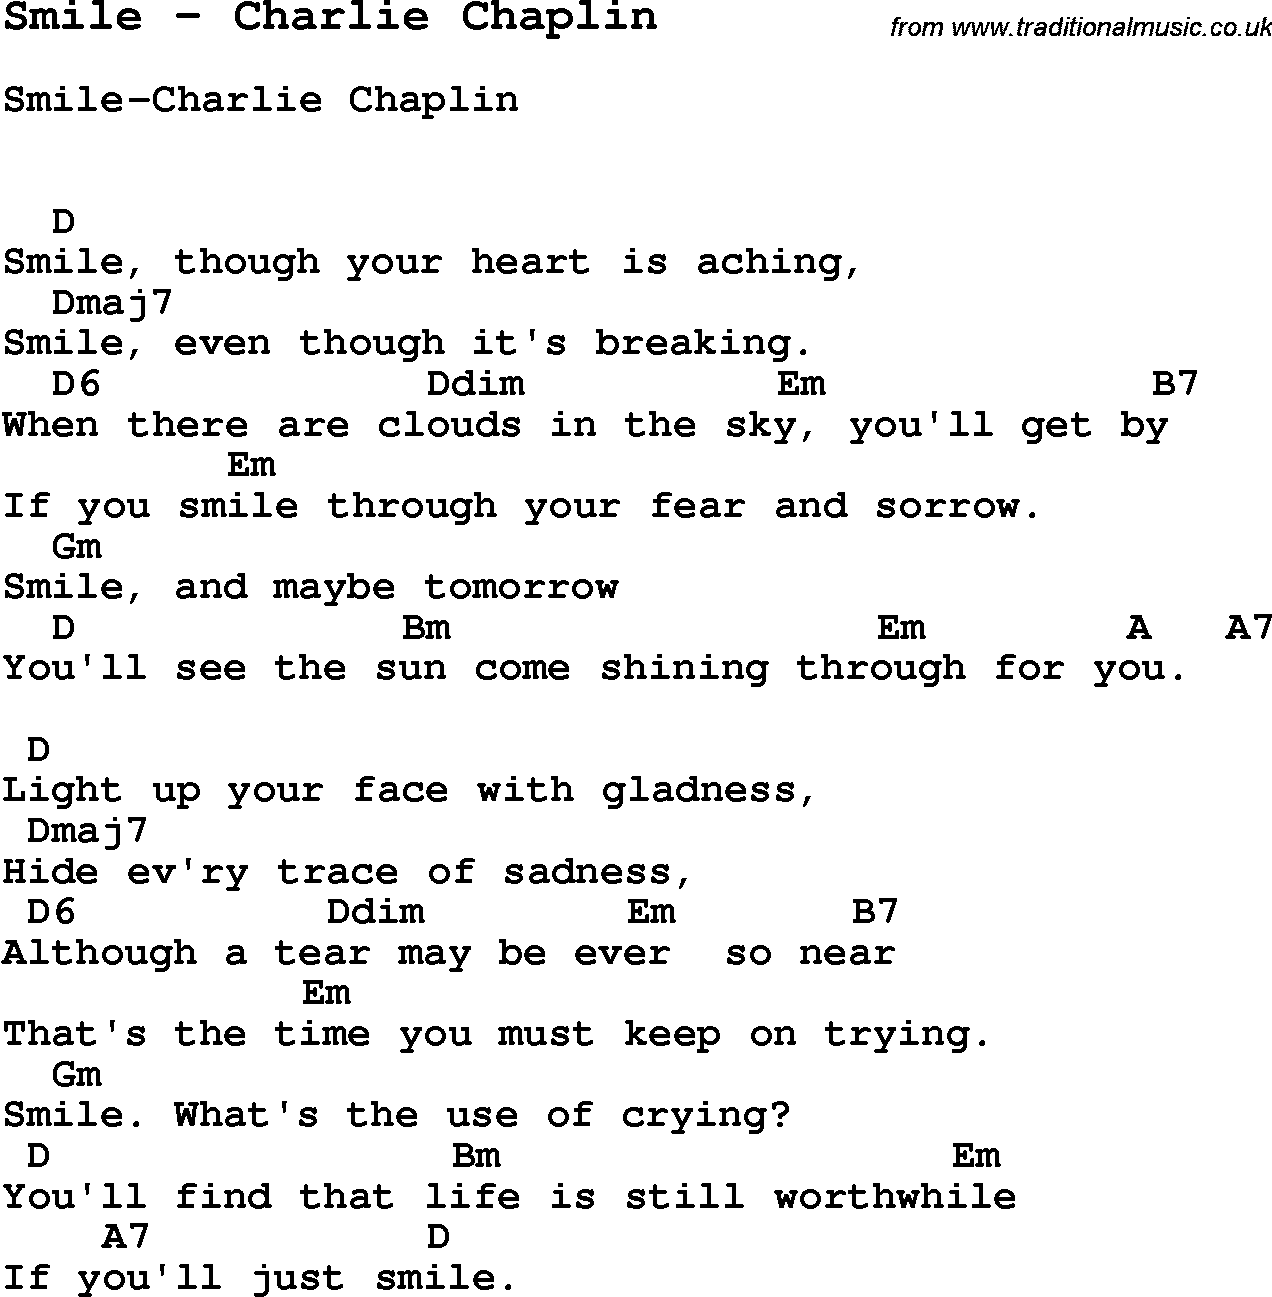 Song Smile by Charlie Chaplin, with lyrics for vocal performance and accompaniment chords for Ukulele, Guitar Banjo etc.